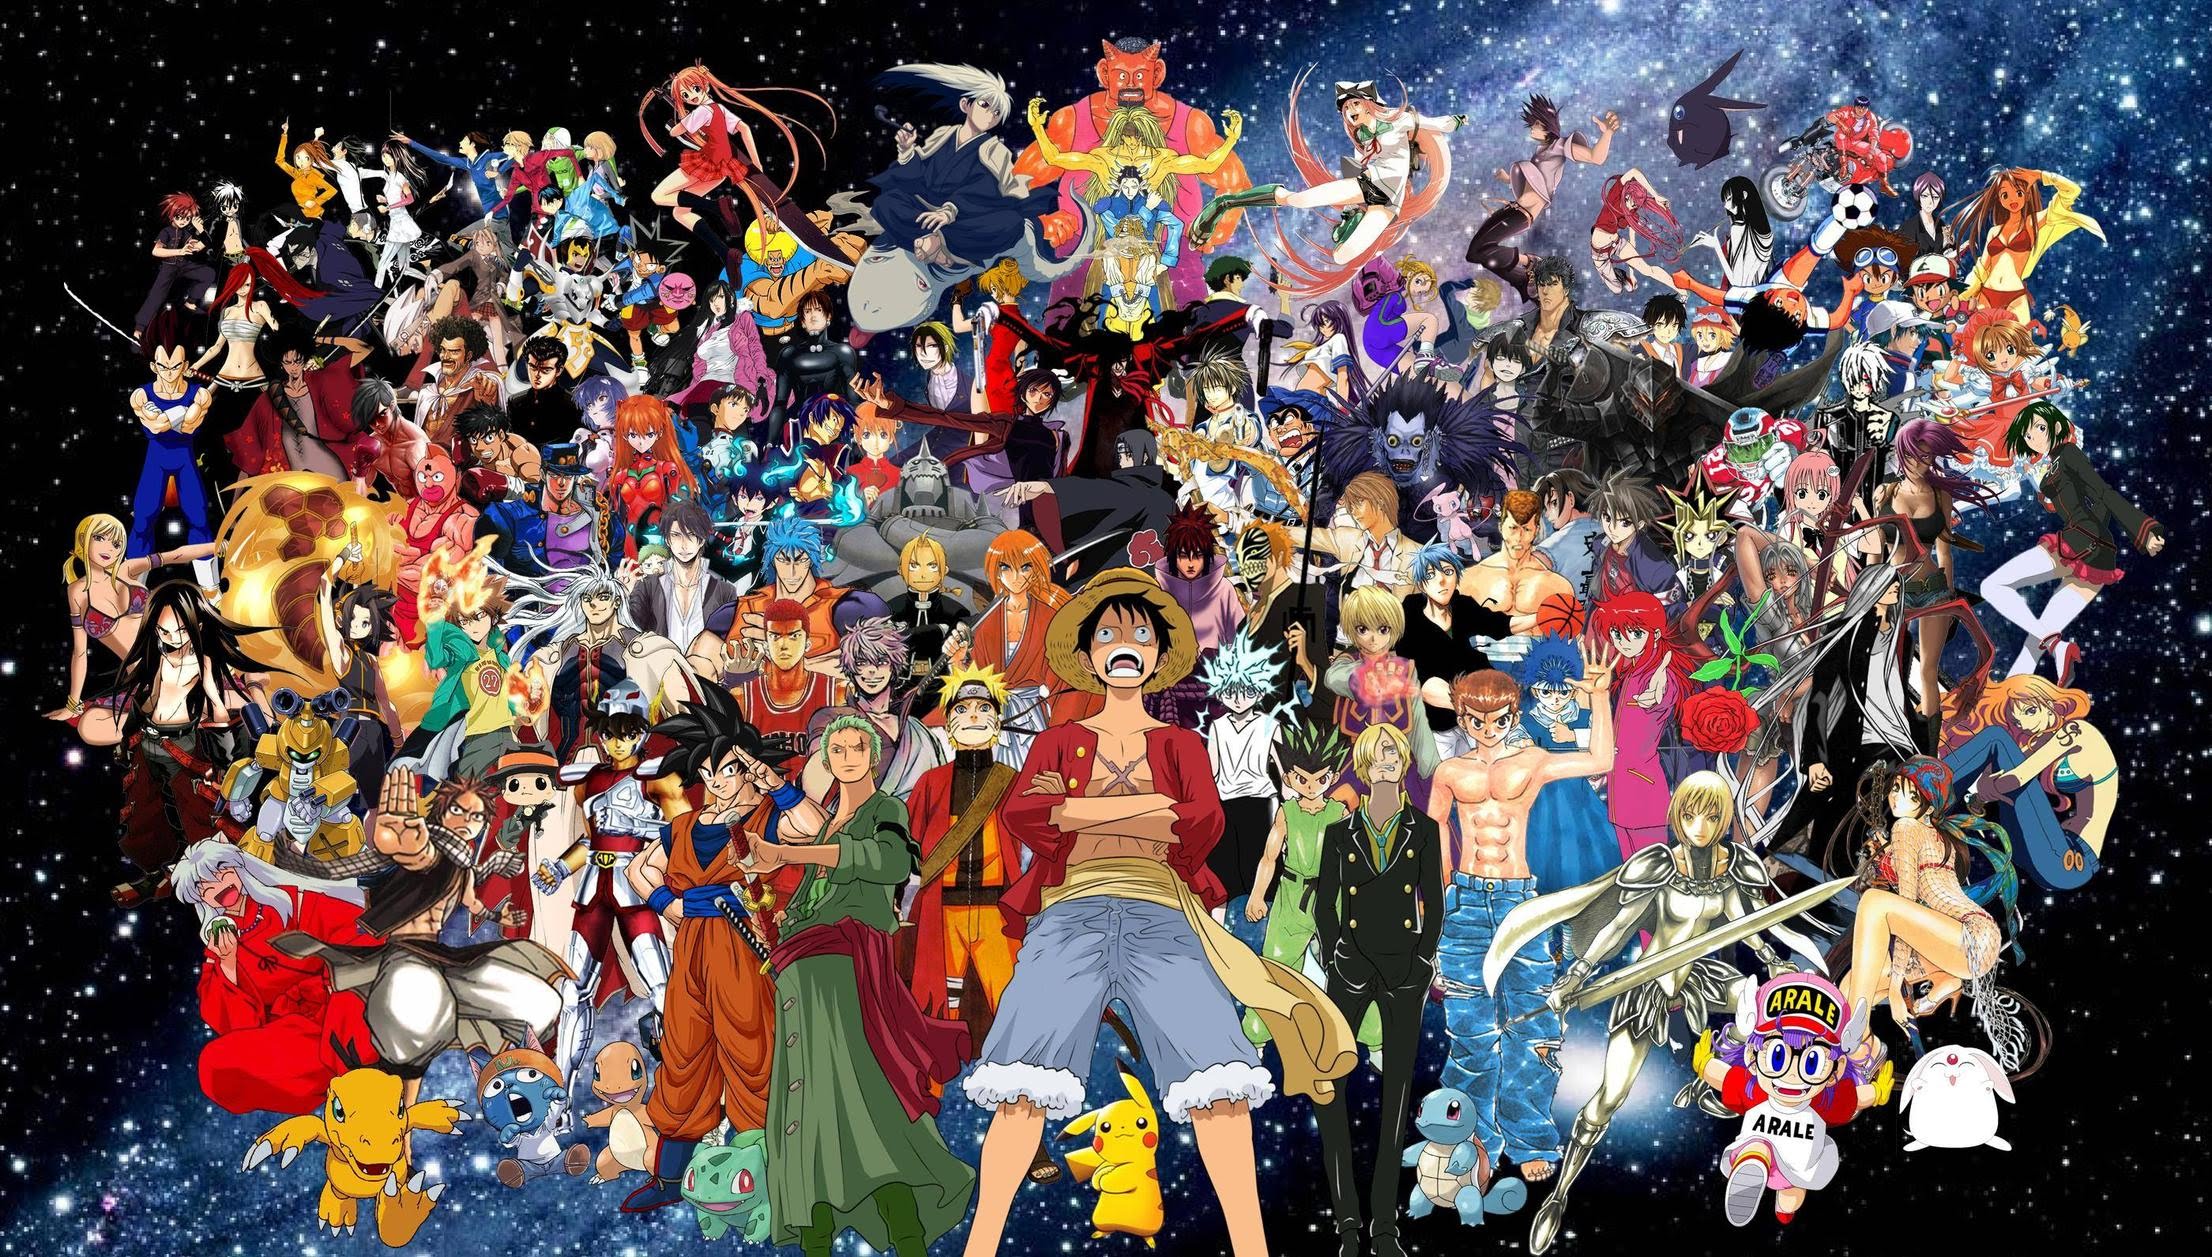 group photo of a variety of characters from various anime